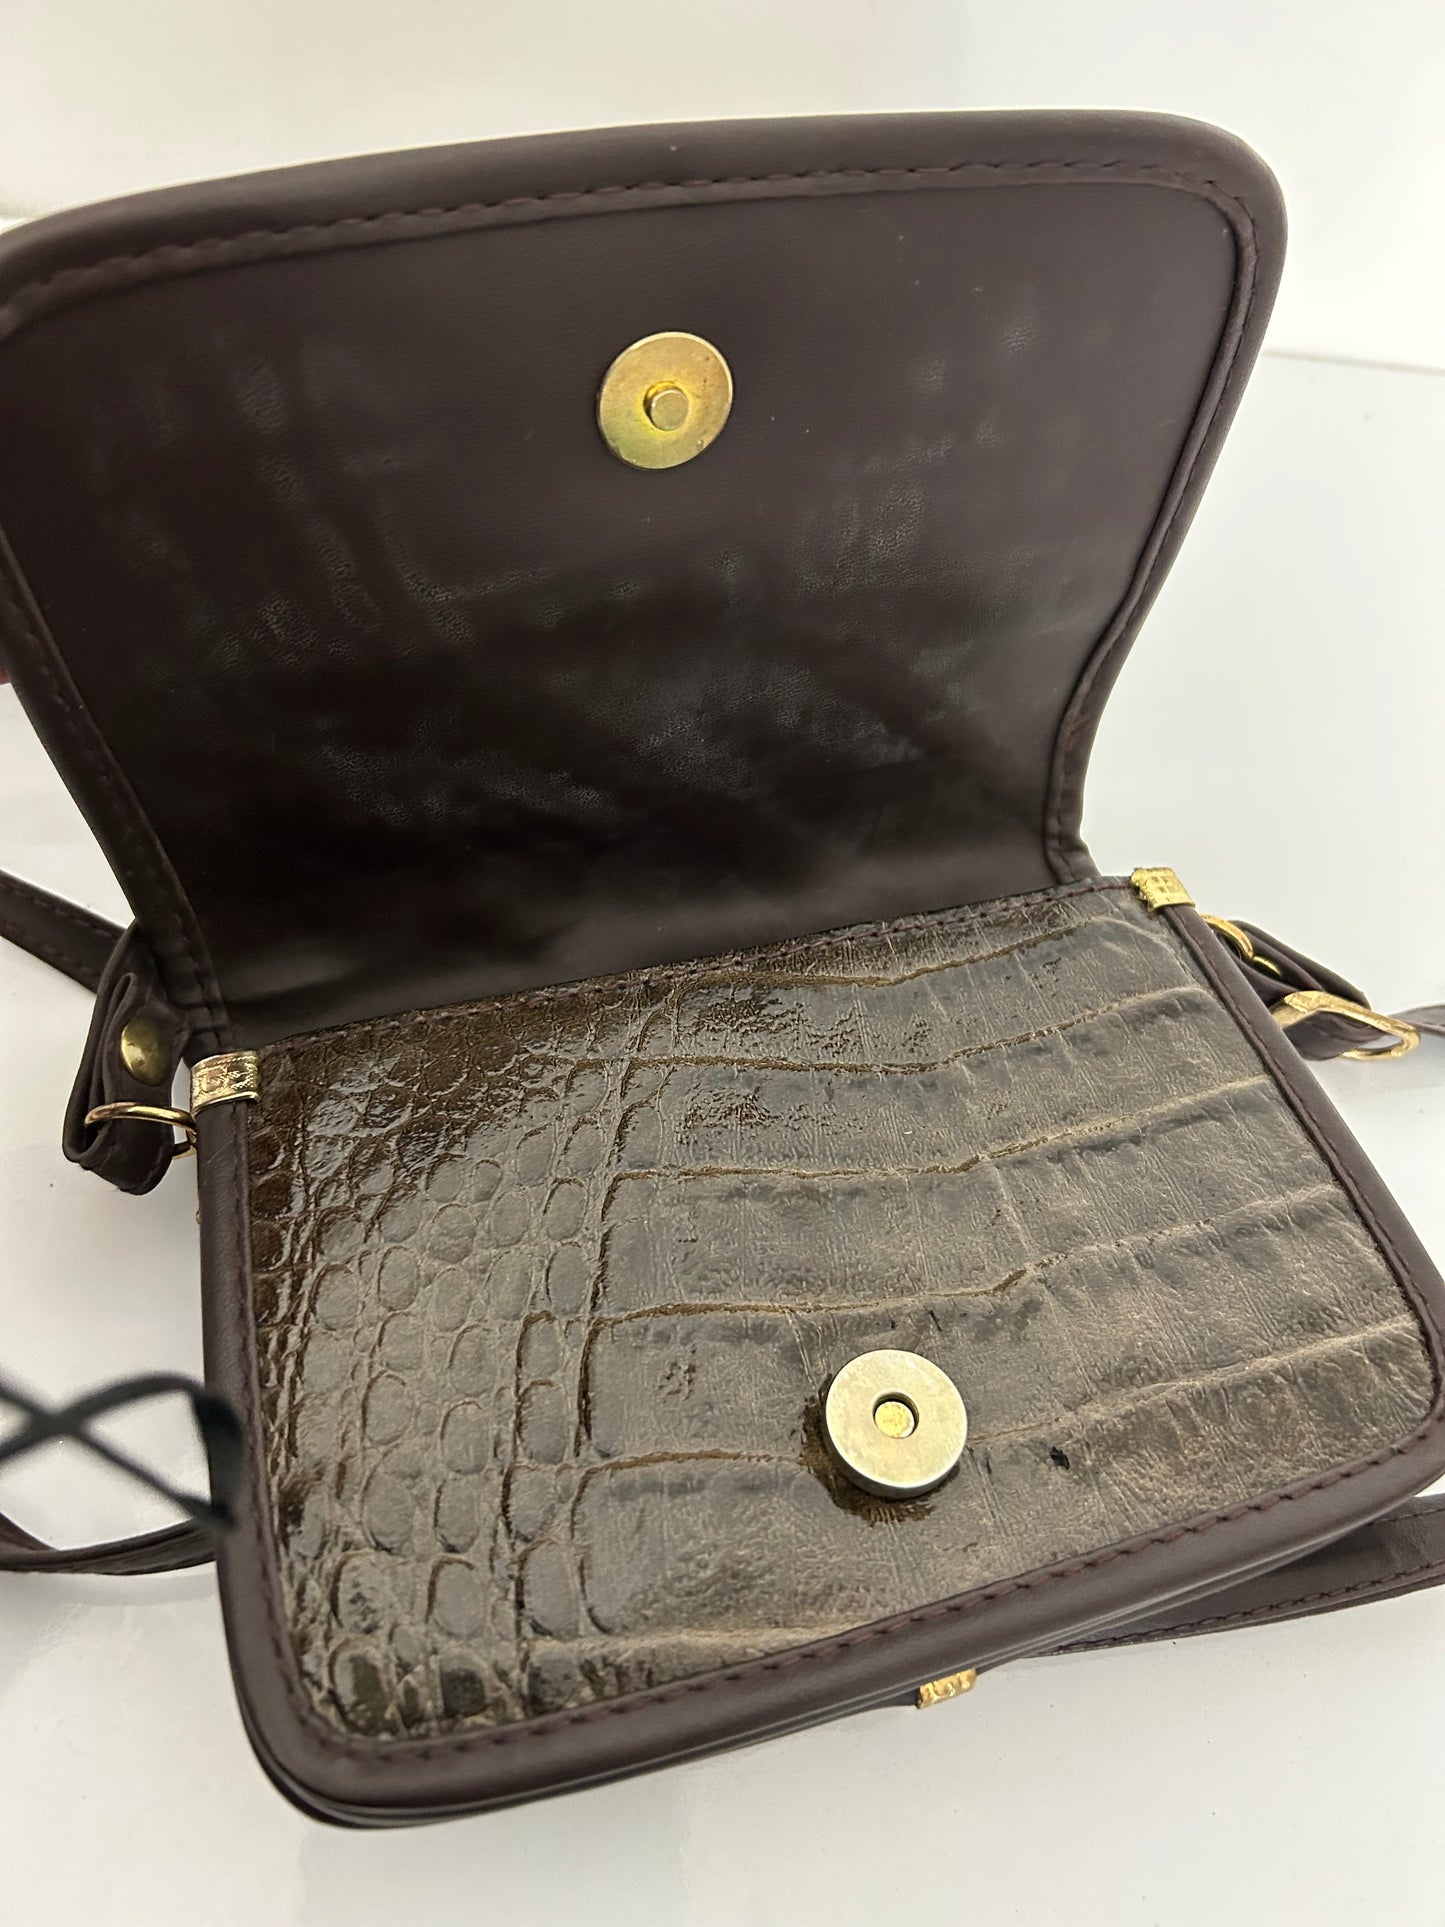 Vintage 1980s Brown Faux Reptile Leather Small Cross Body Handbag